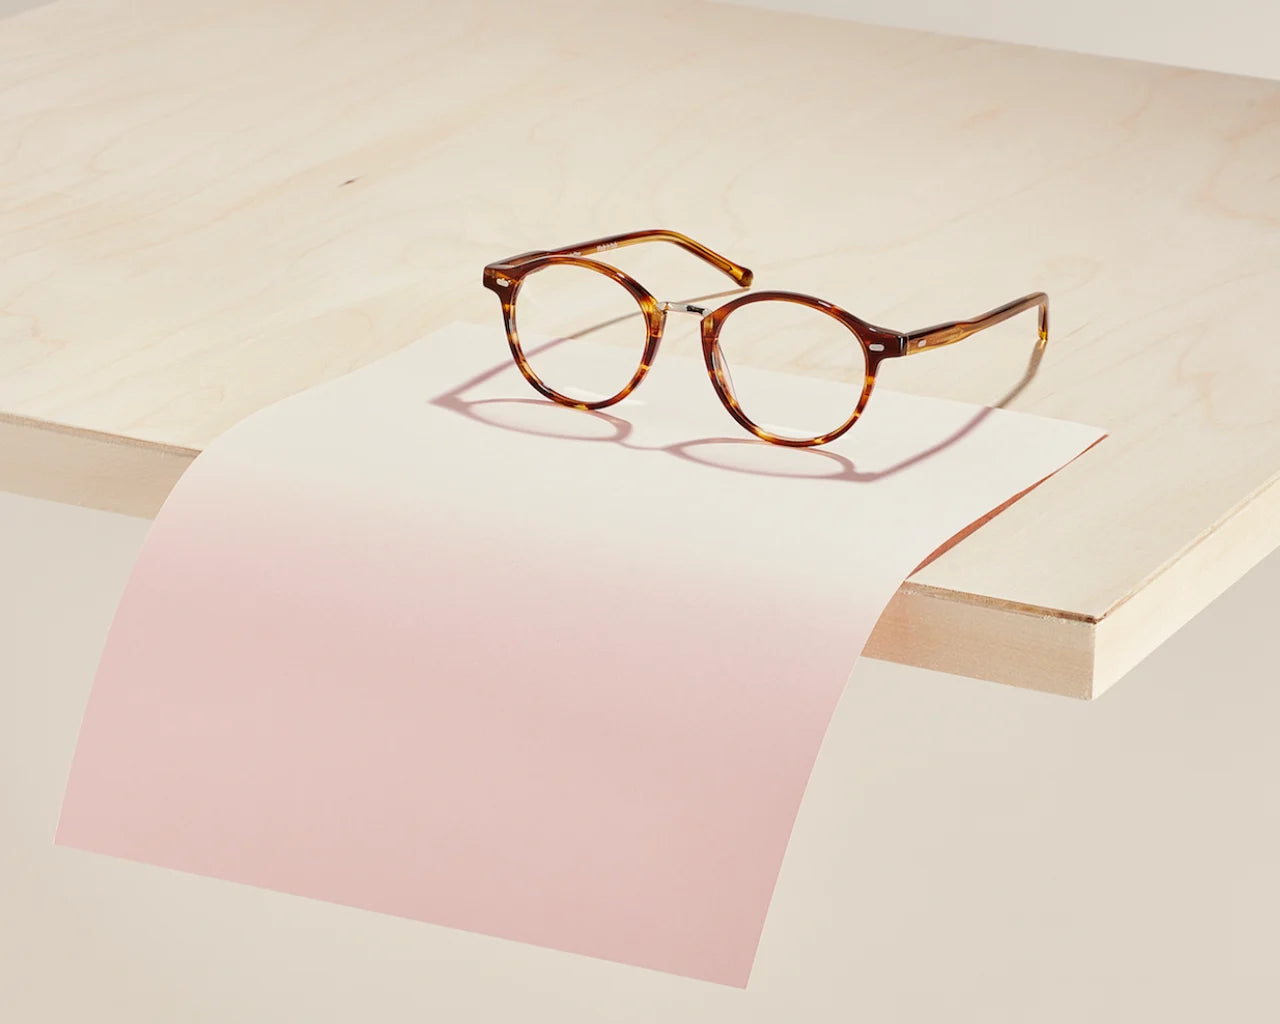 Round eyeglasses on table - image credit Article One